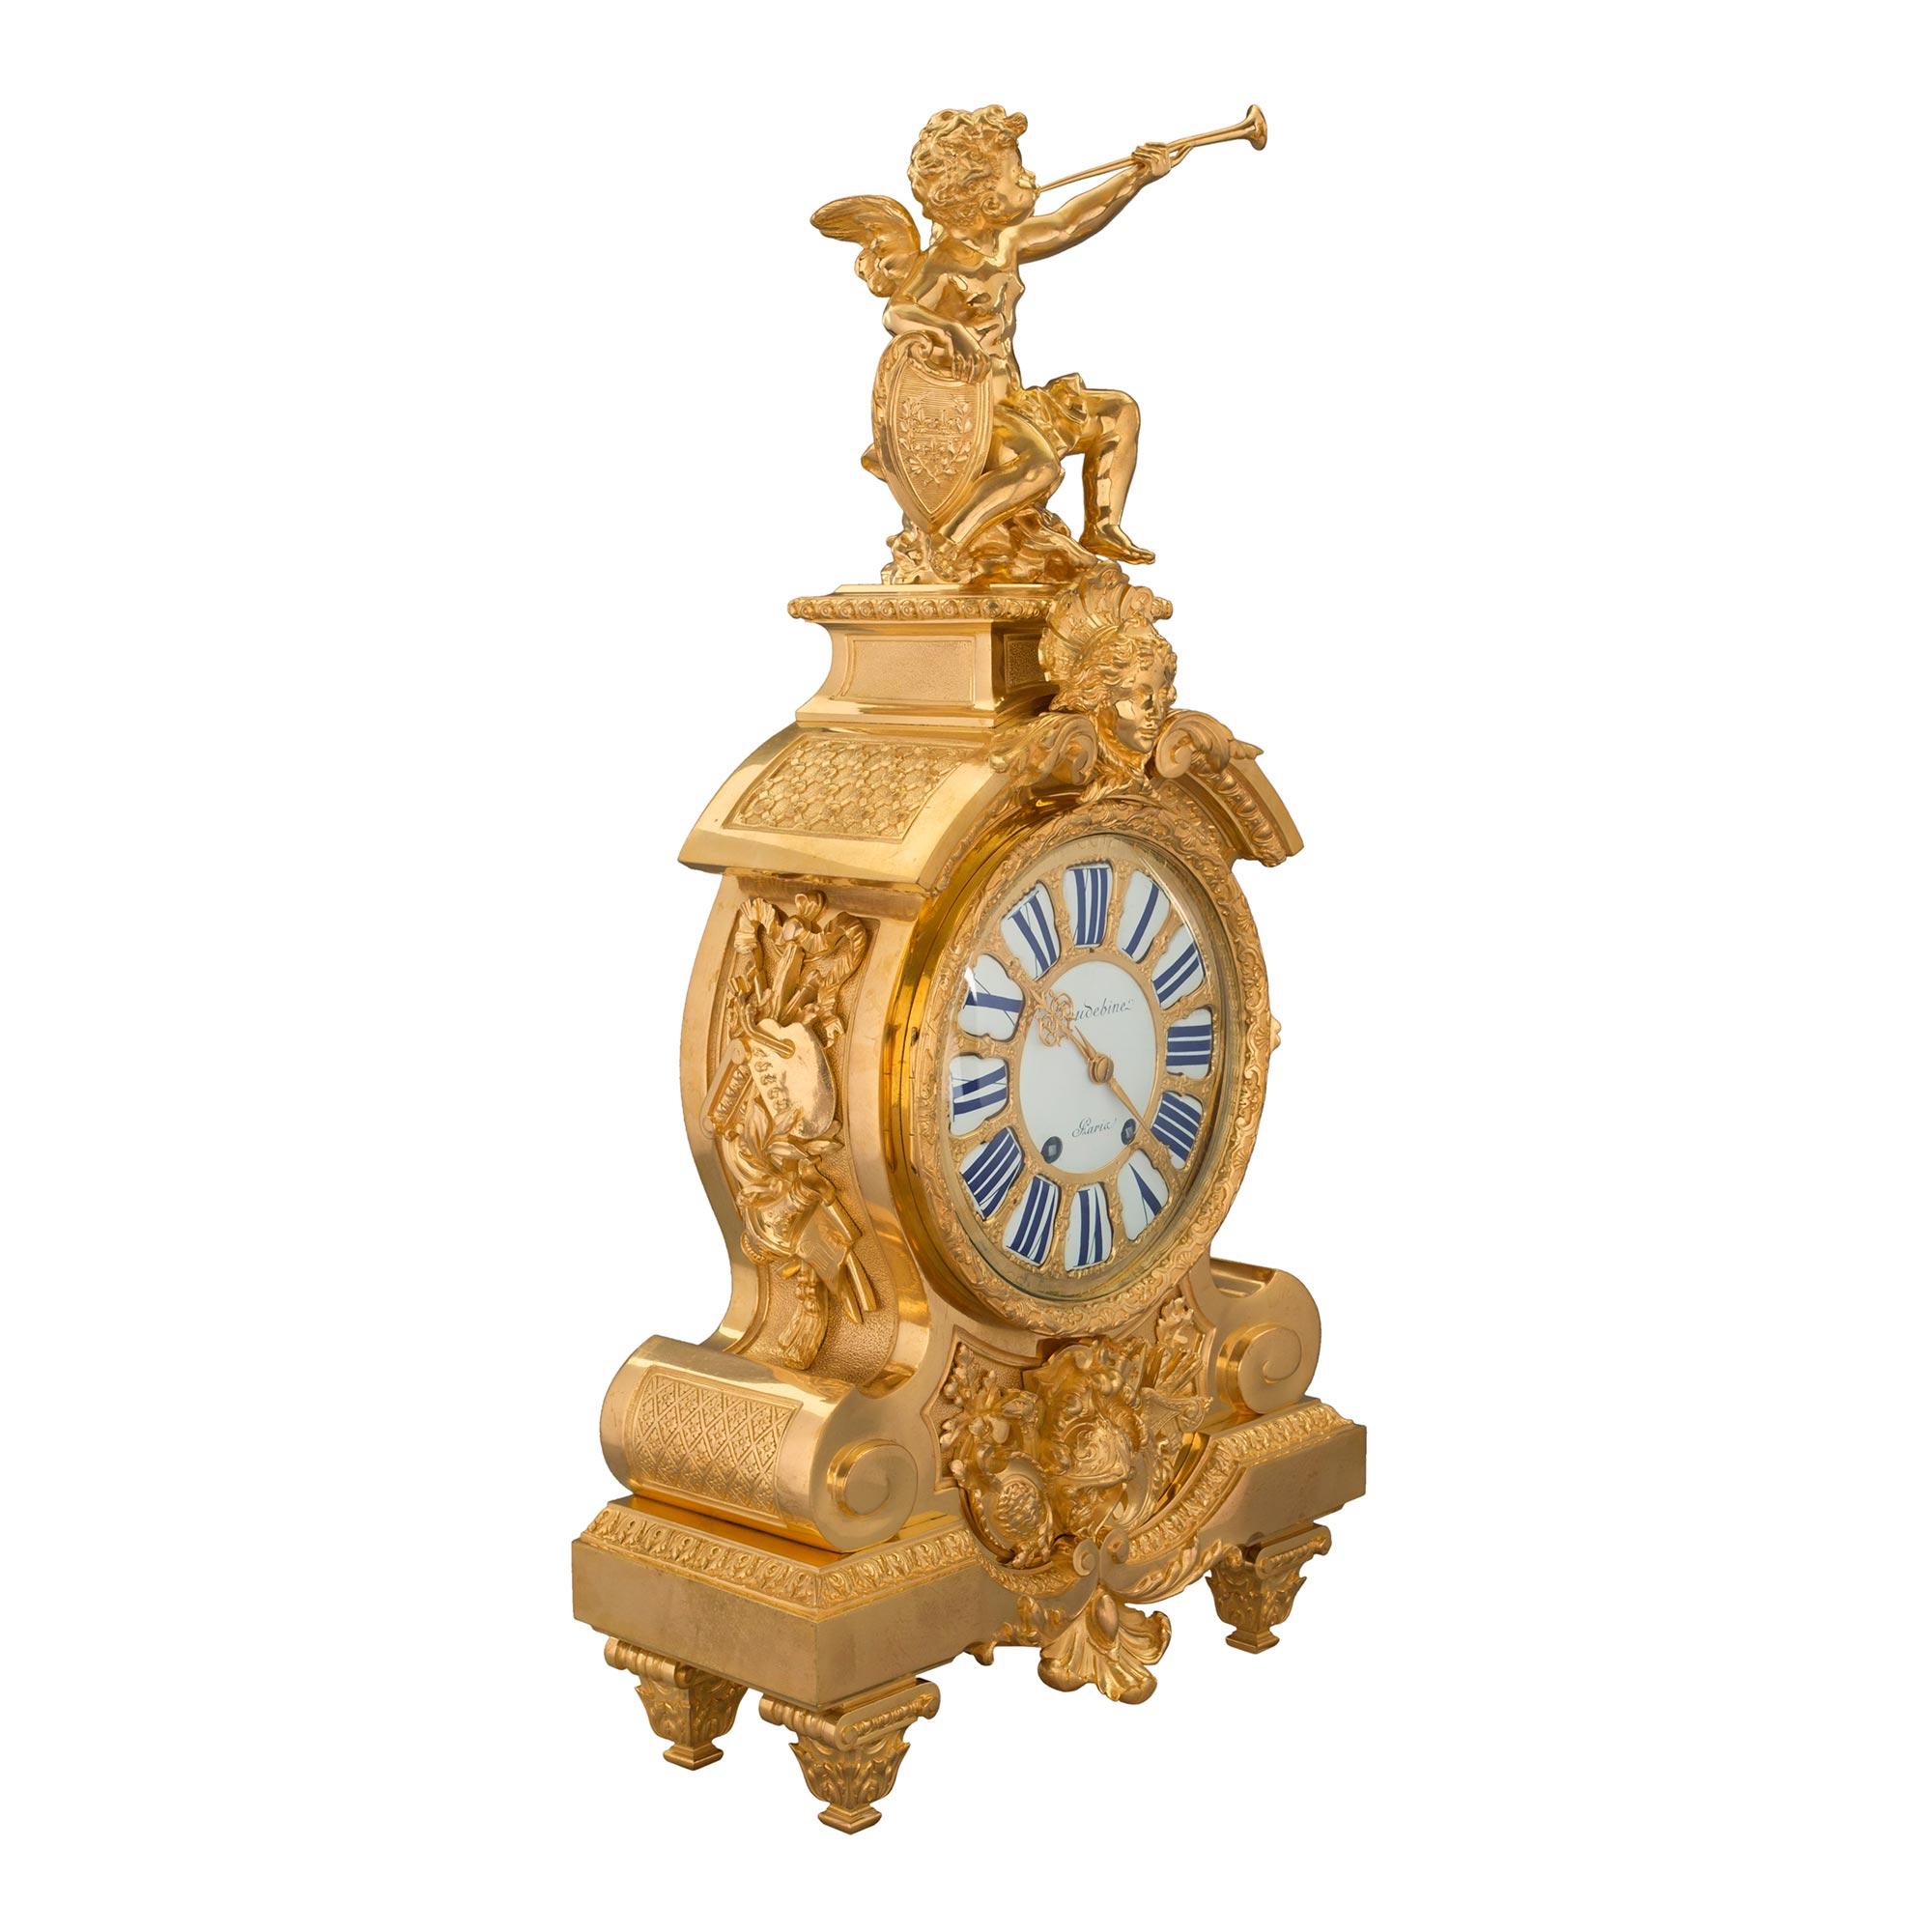 An extraordinary and high quality French 19th century Louis XIV st. ormolu three piece clock and candelabras garniture set. Each raised by square tapered fluted feet with fine acanthus leaf sabots. The clock displays a magnificent family crest